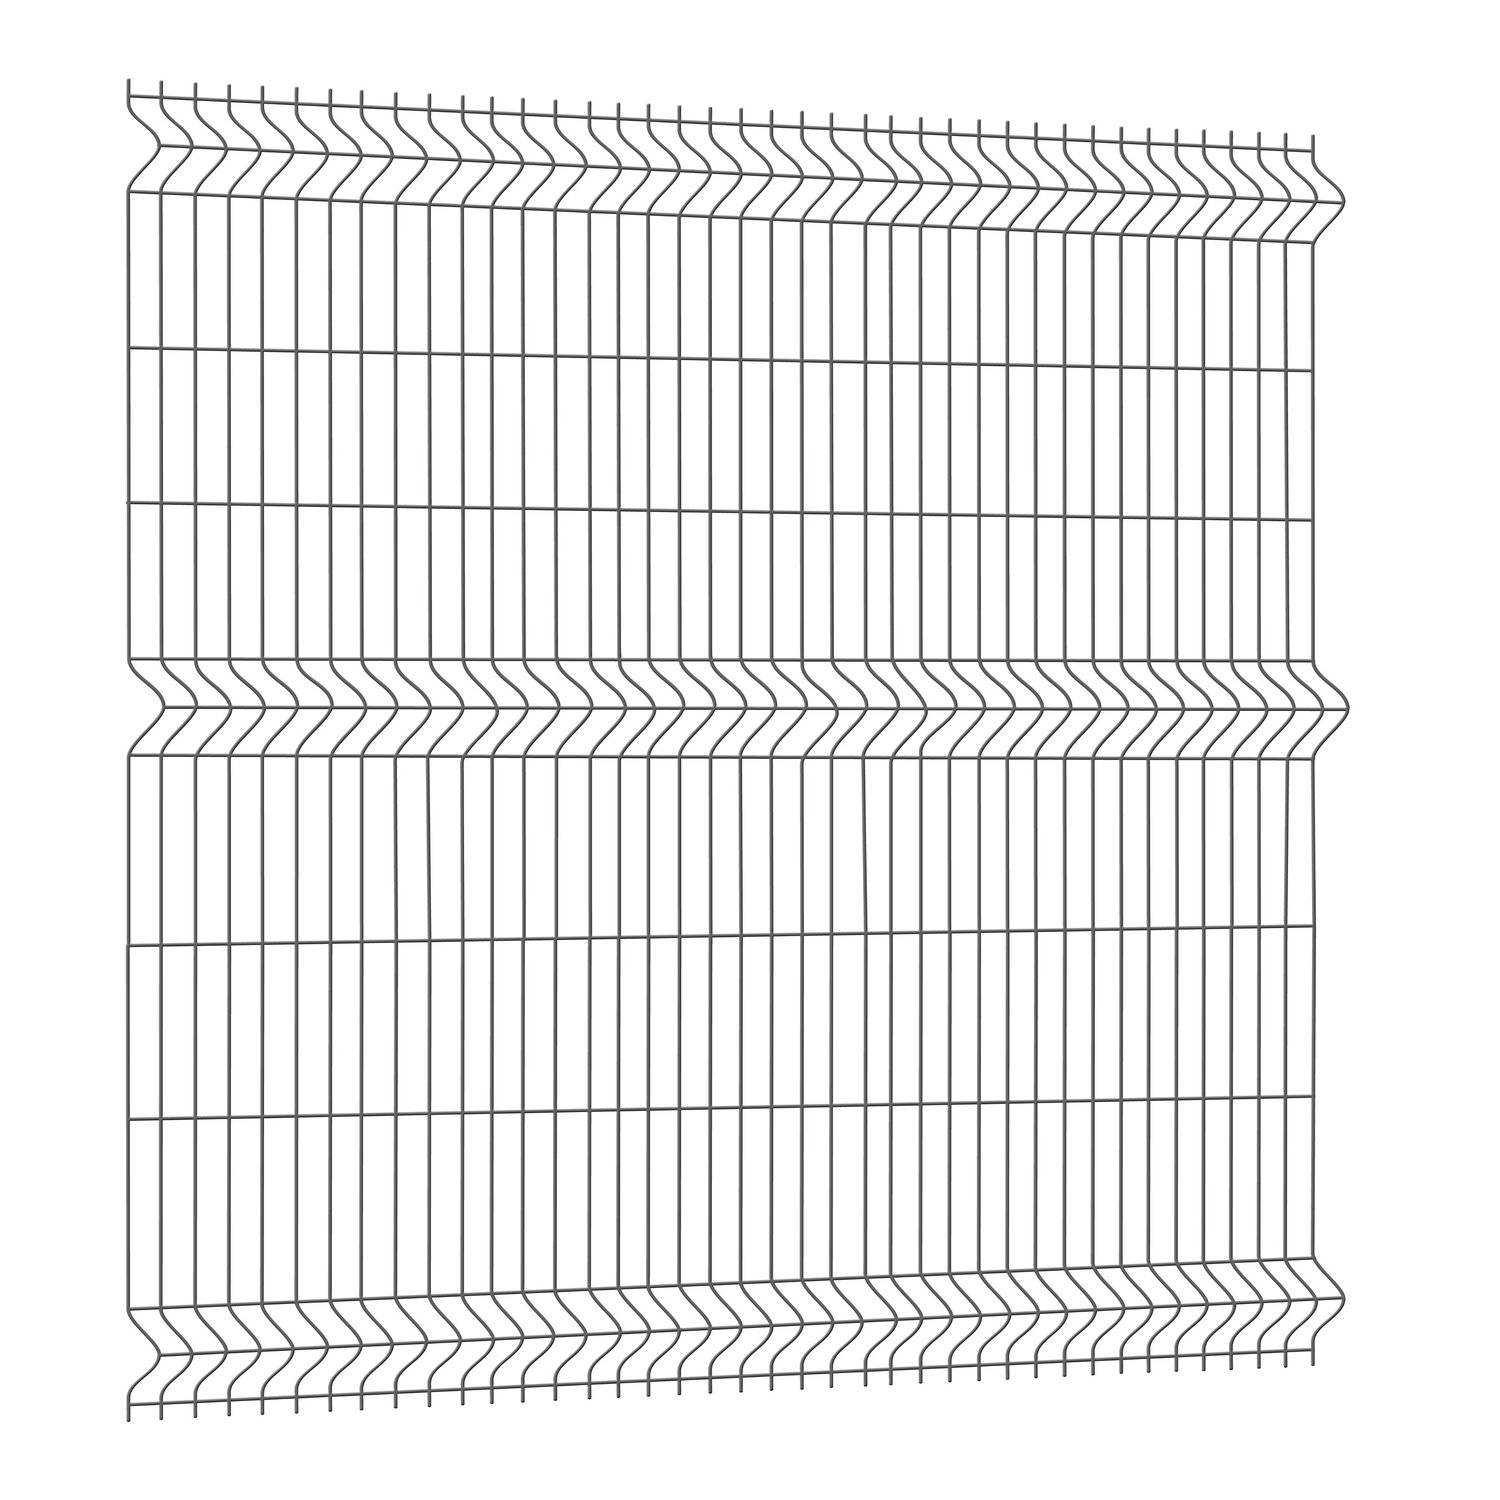 Wholesale Price China Aluminium Fence Panels - PVC Welded Wire Mesh Fencing  – Tian Yilong